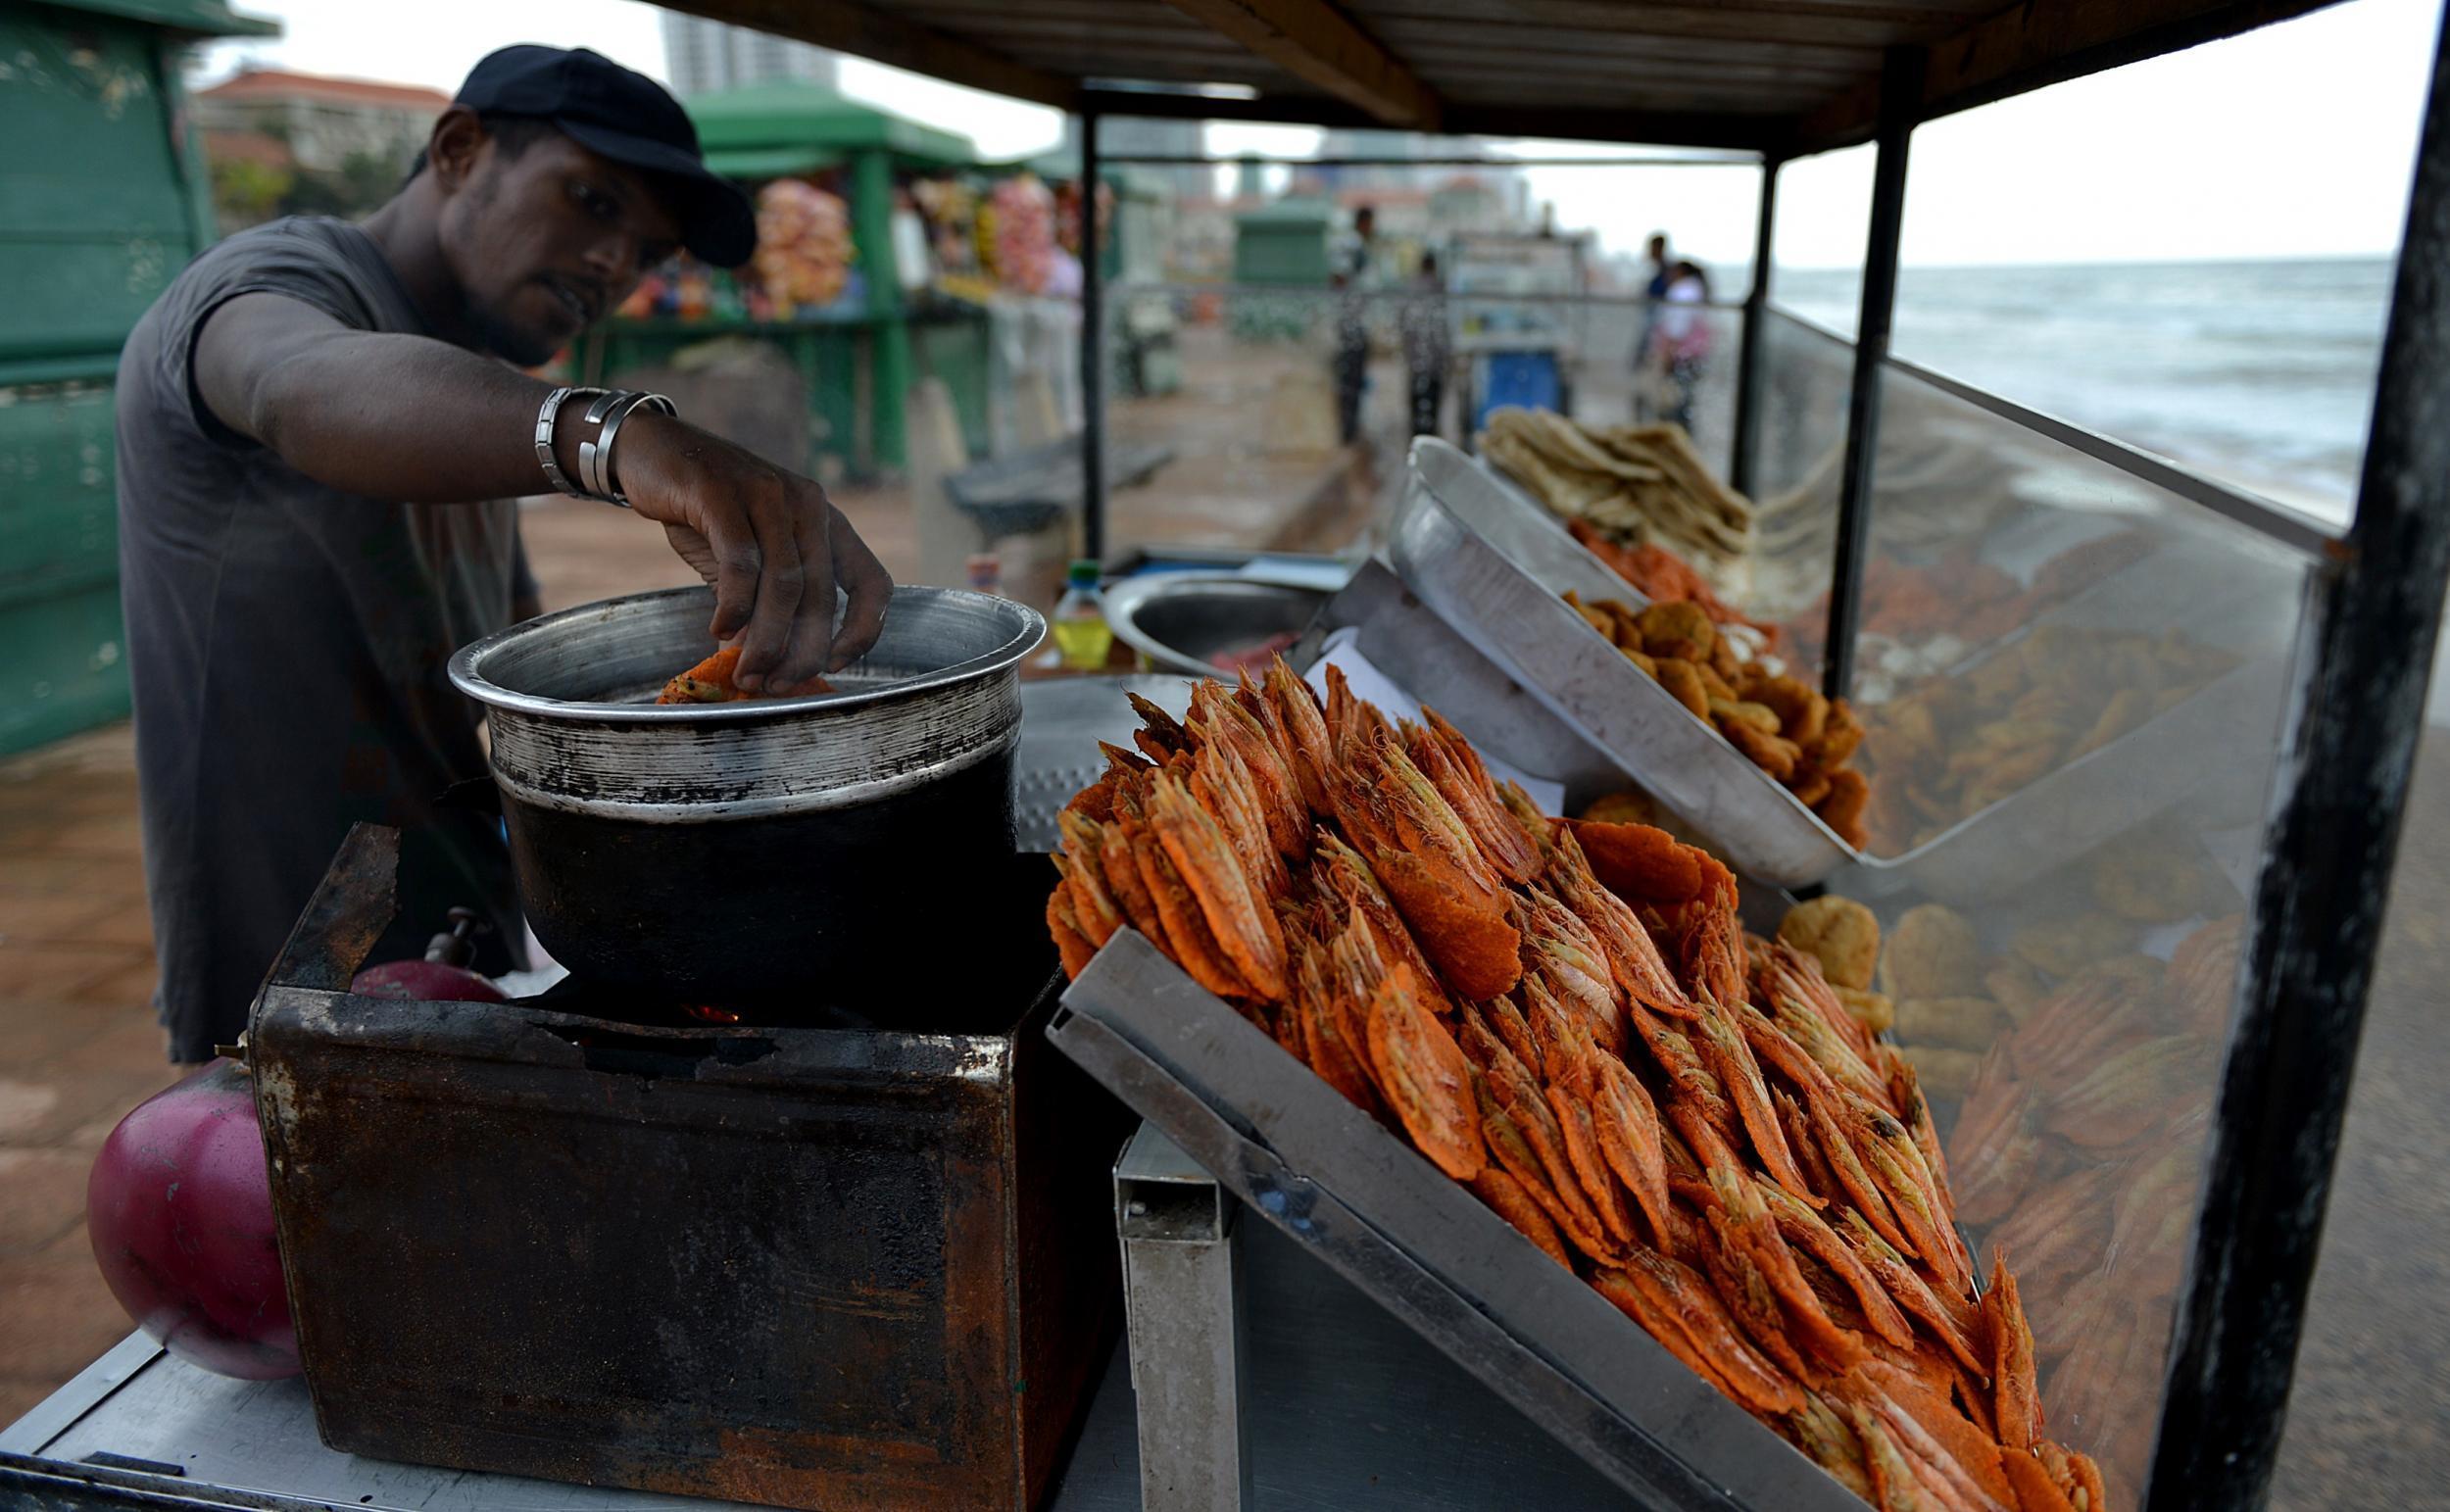 A vendor sells street snack isso vadei on Galle Face Beach